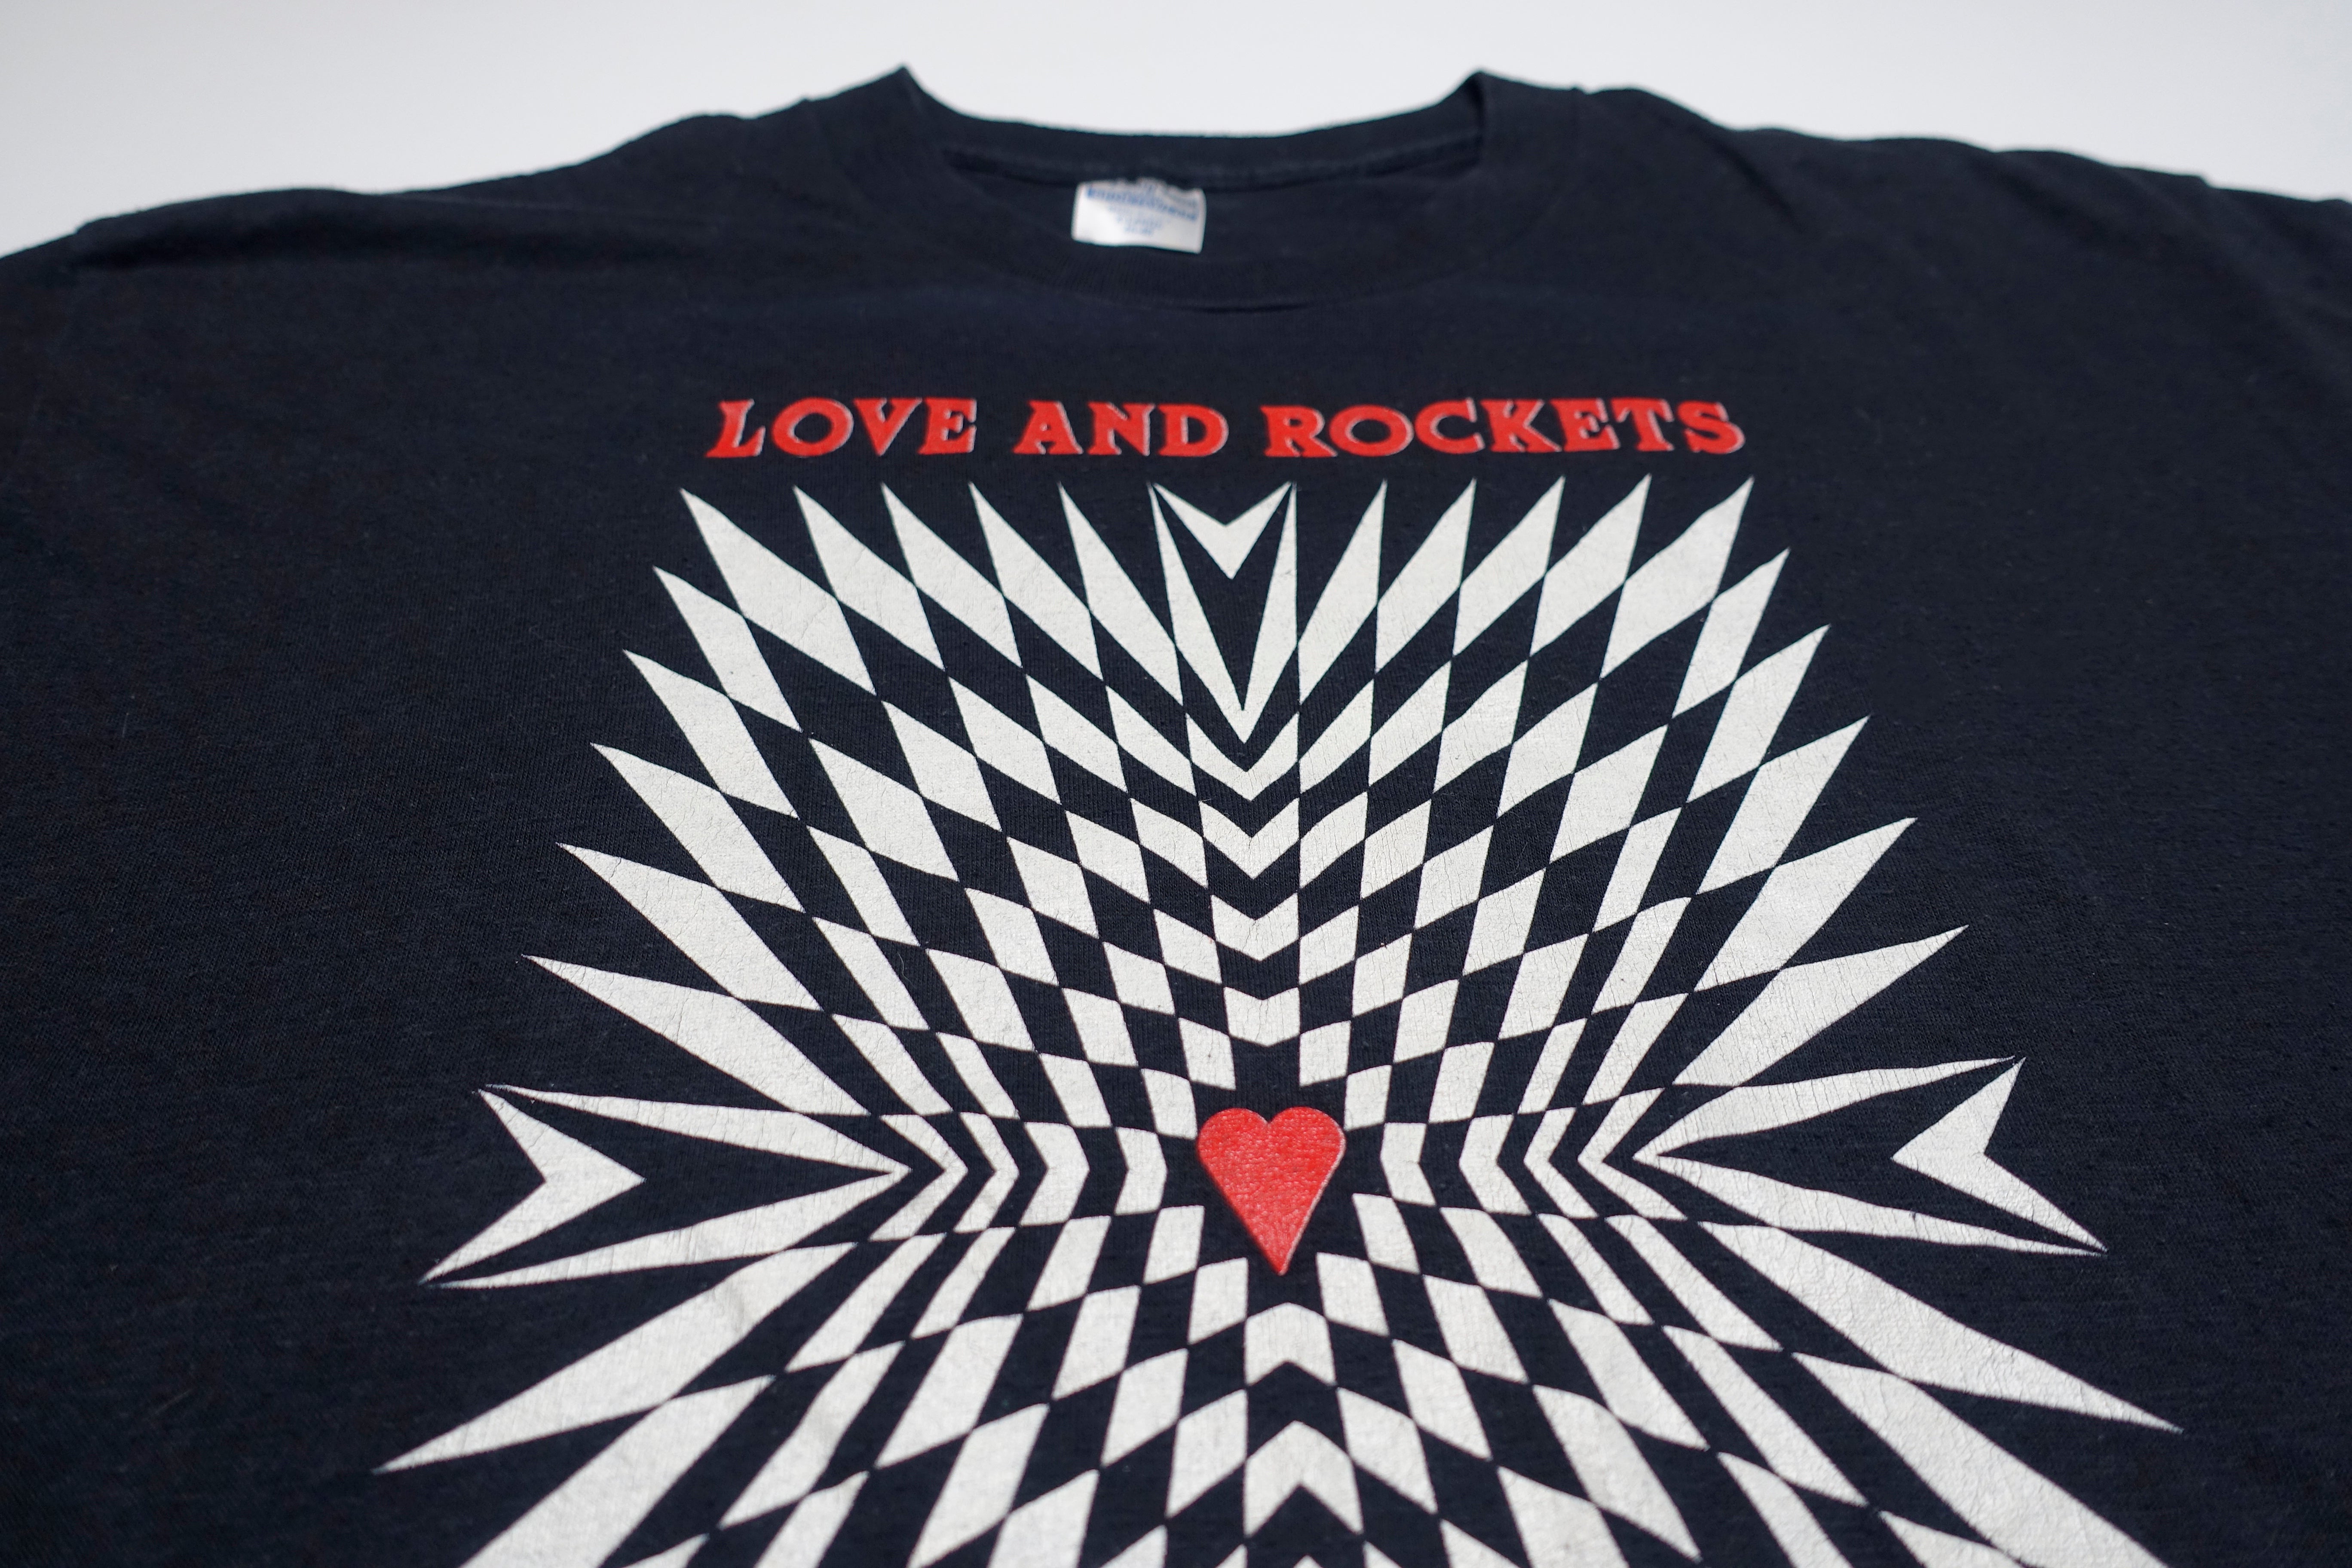 Love And Rockets ‎– Love And Rockets 1989 Tour Shirt Size XL / Large